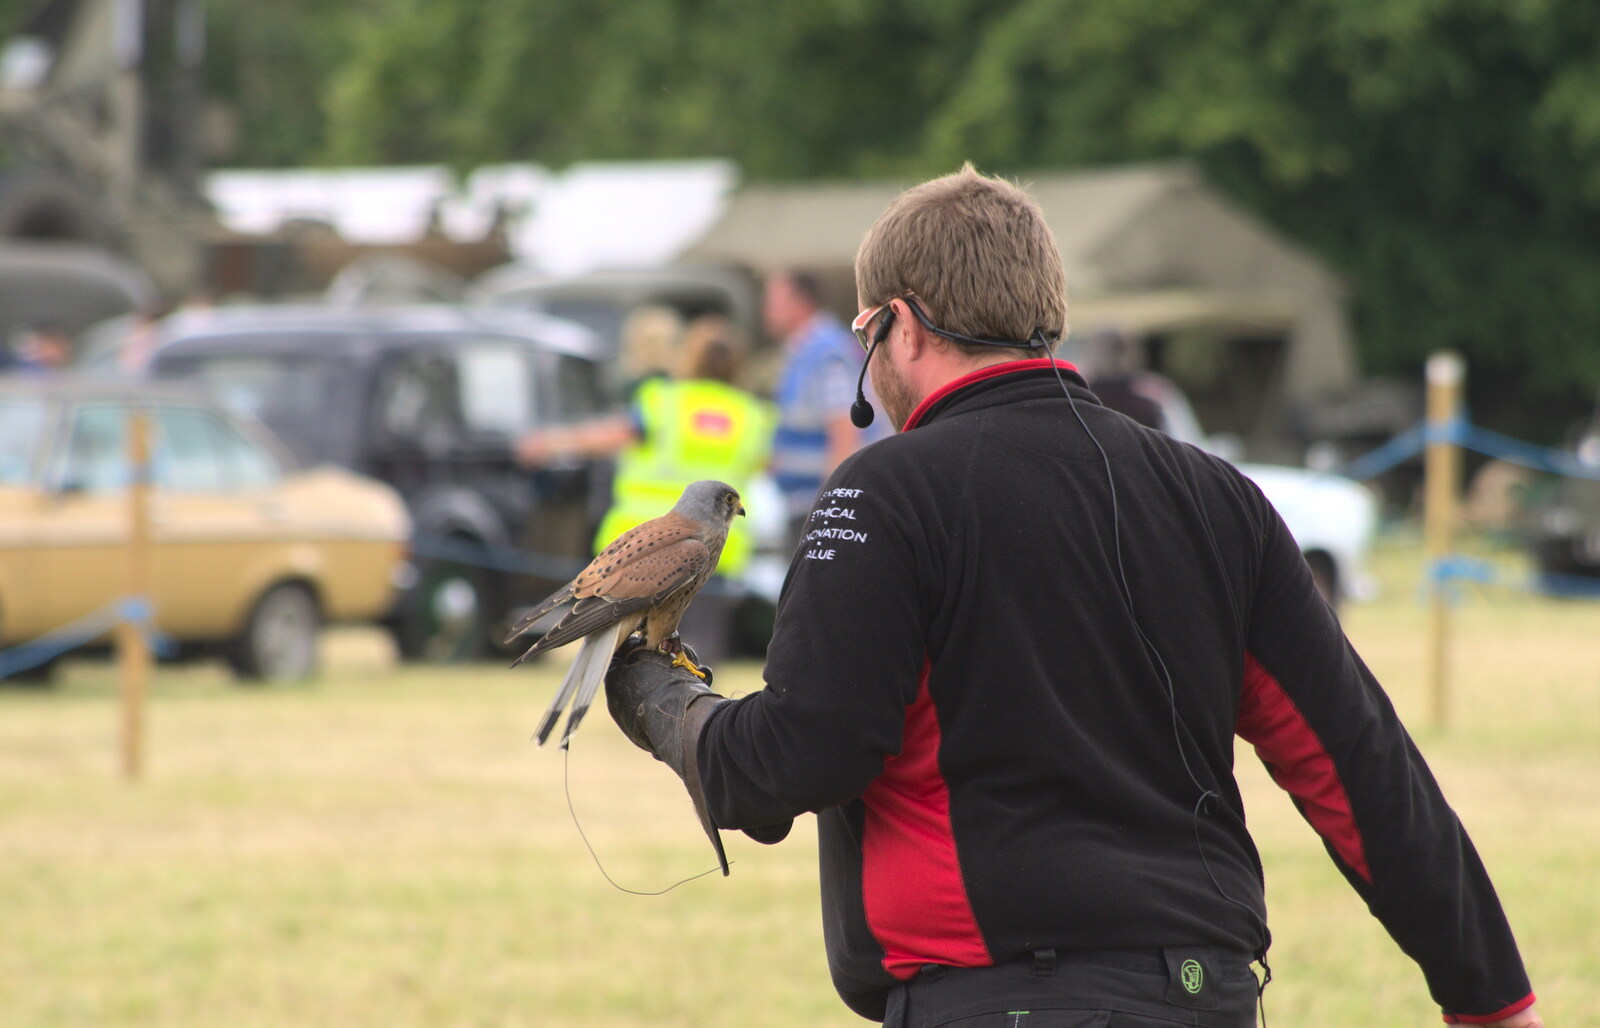 The kestrel is back in hand from A Vintage Tractorey Sort of Day, Palgrave, Suffolk - 21st June 2015